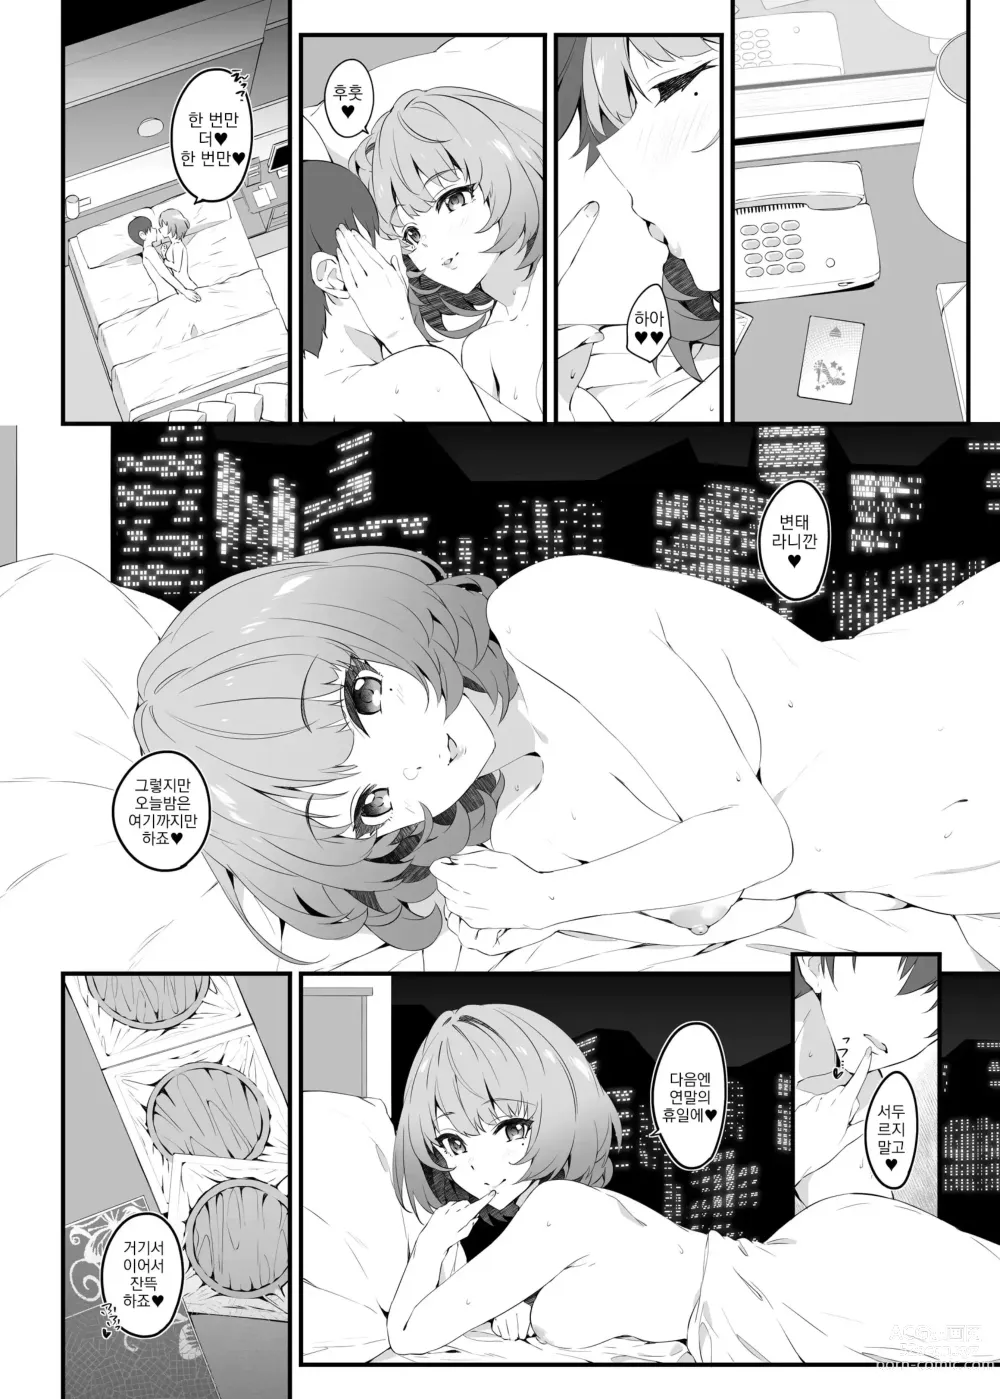 Page 6 of doujinshi Flowers blooming at night and the kings in the dream.